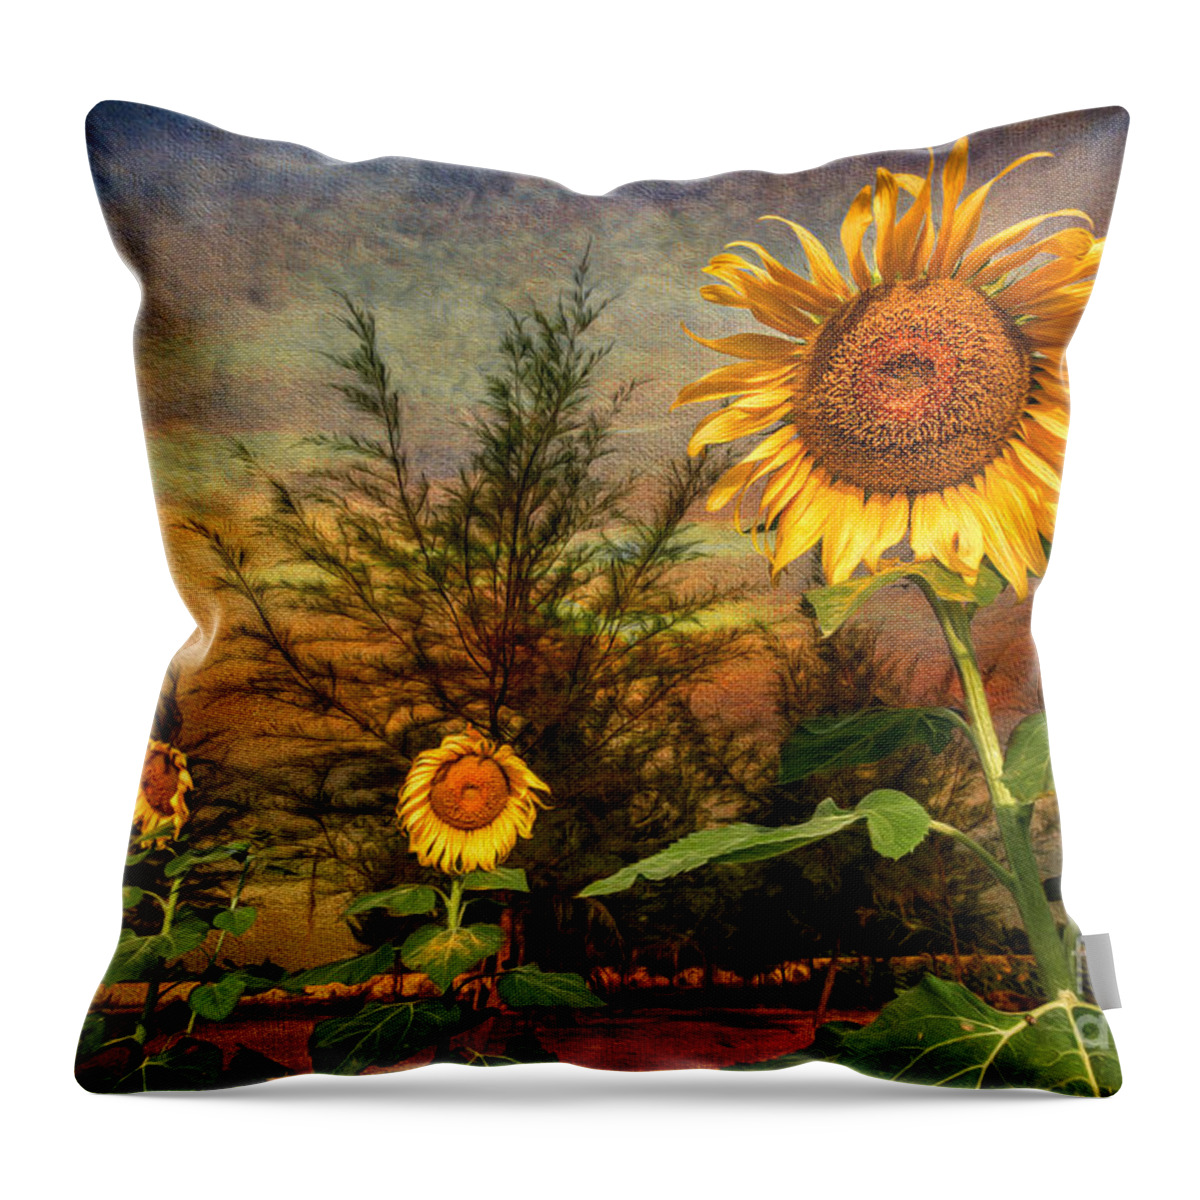 Sunflower Throw Pillow featuring the photograph Three Sunflowers by Adrian Evans